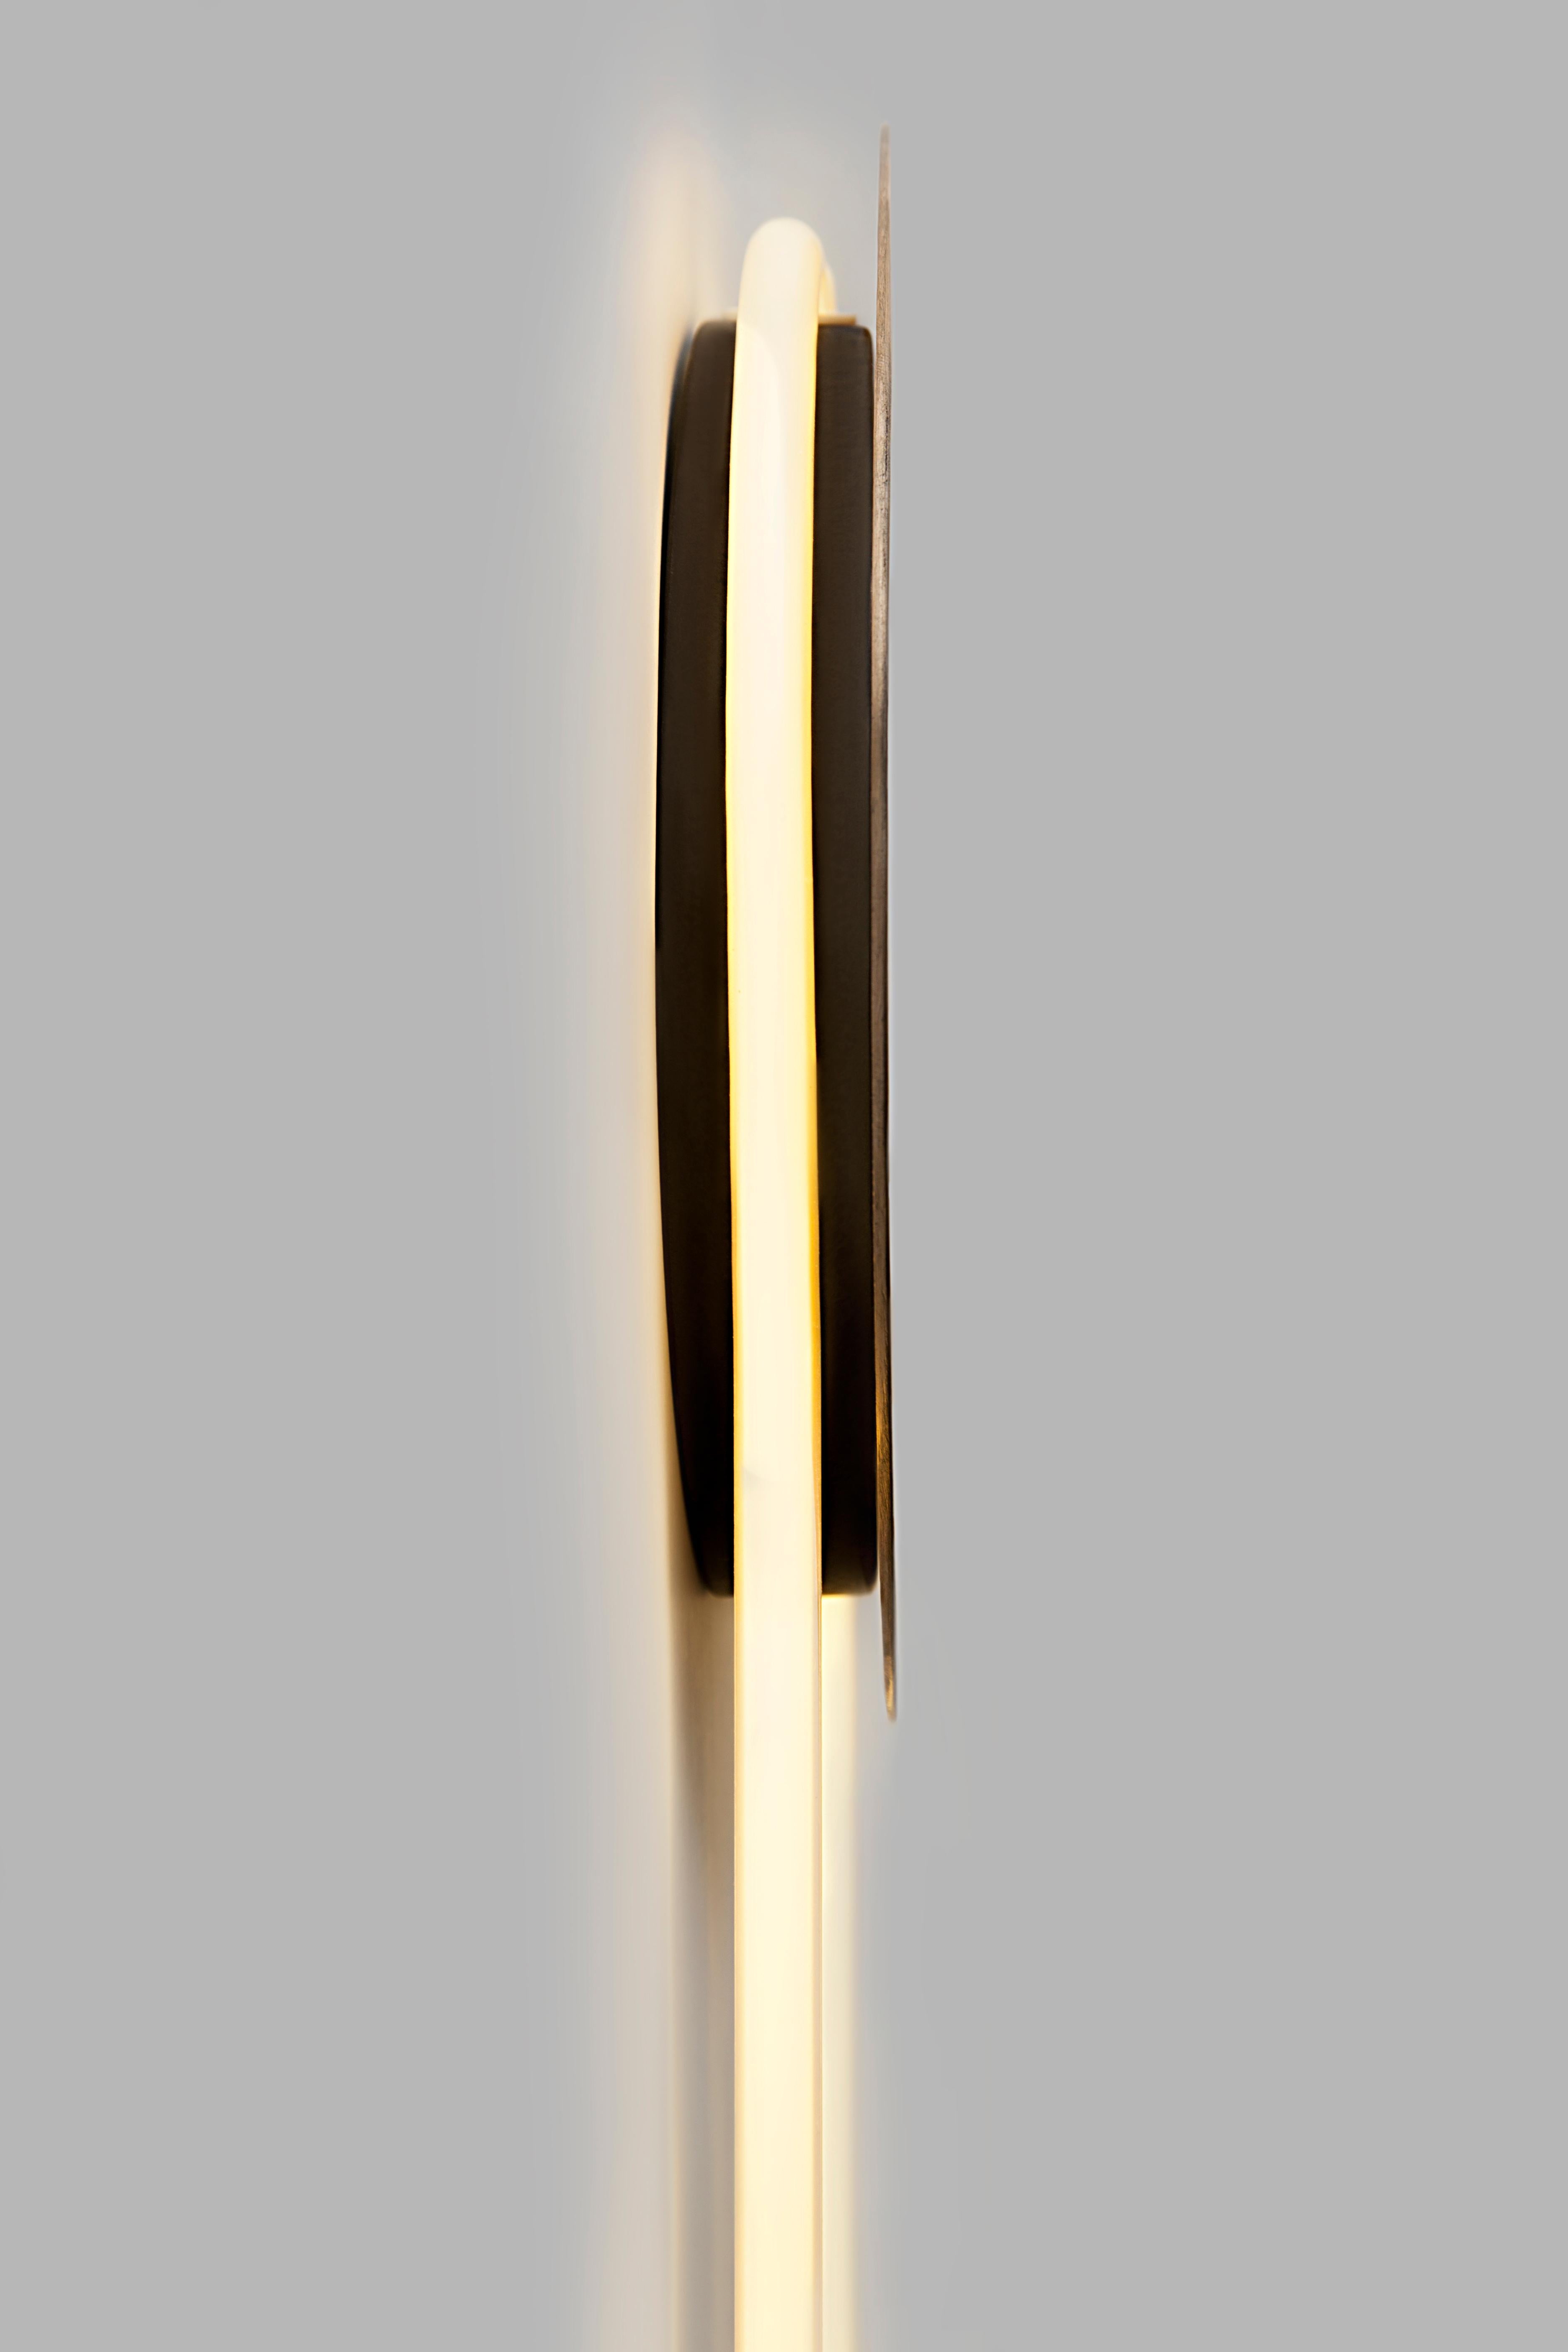 Contemporary Ra Wall Short Mirror Hand Bent Neon Wall Sconce Lighting by Studio d'armes For Sale